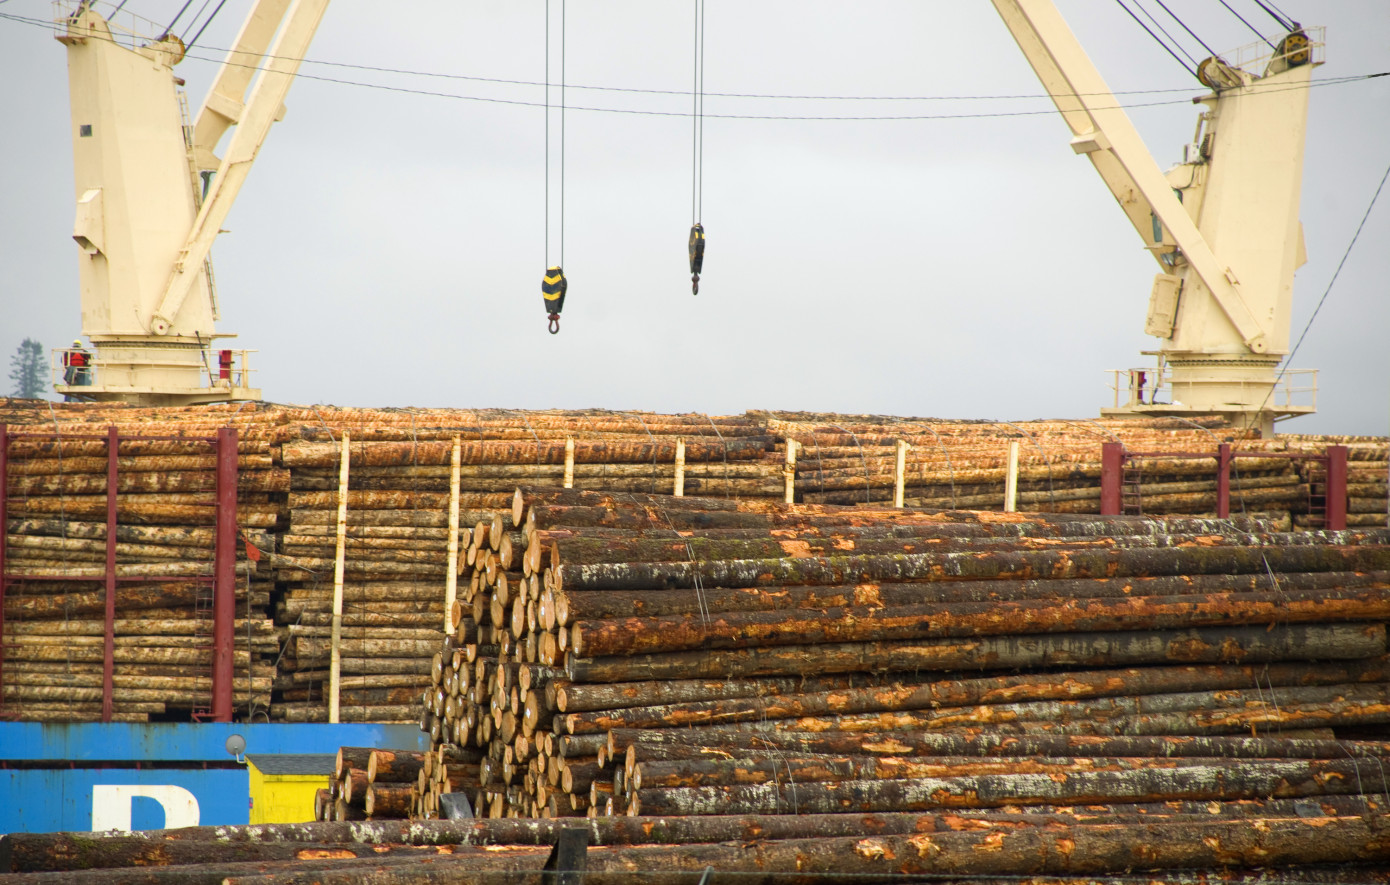 In June, China decreases softwood log imports by 37%